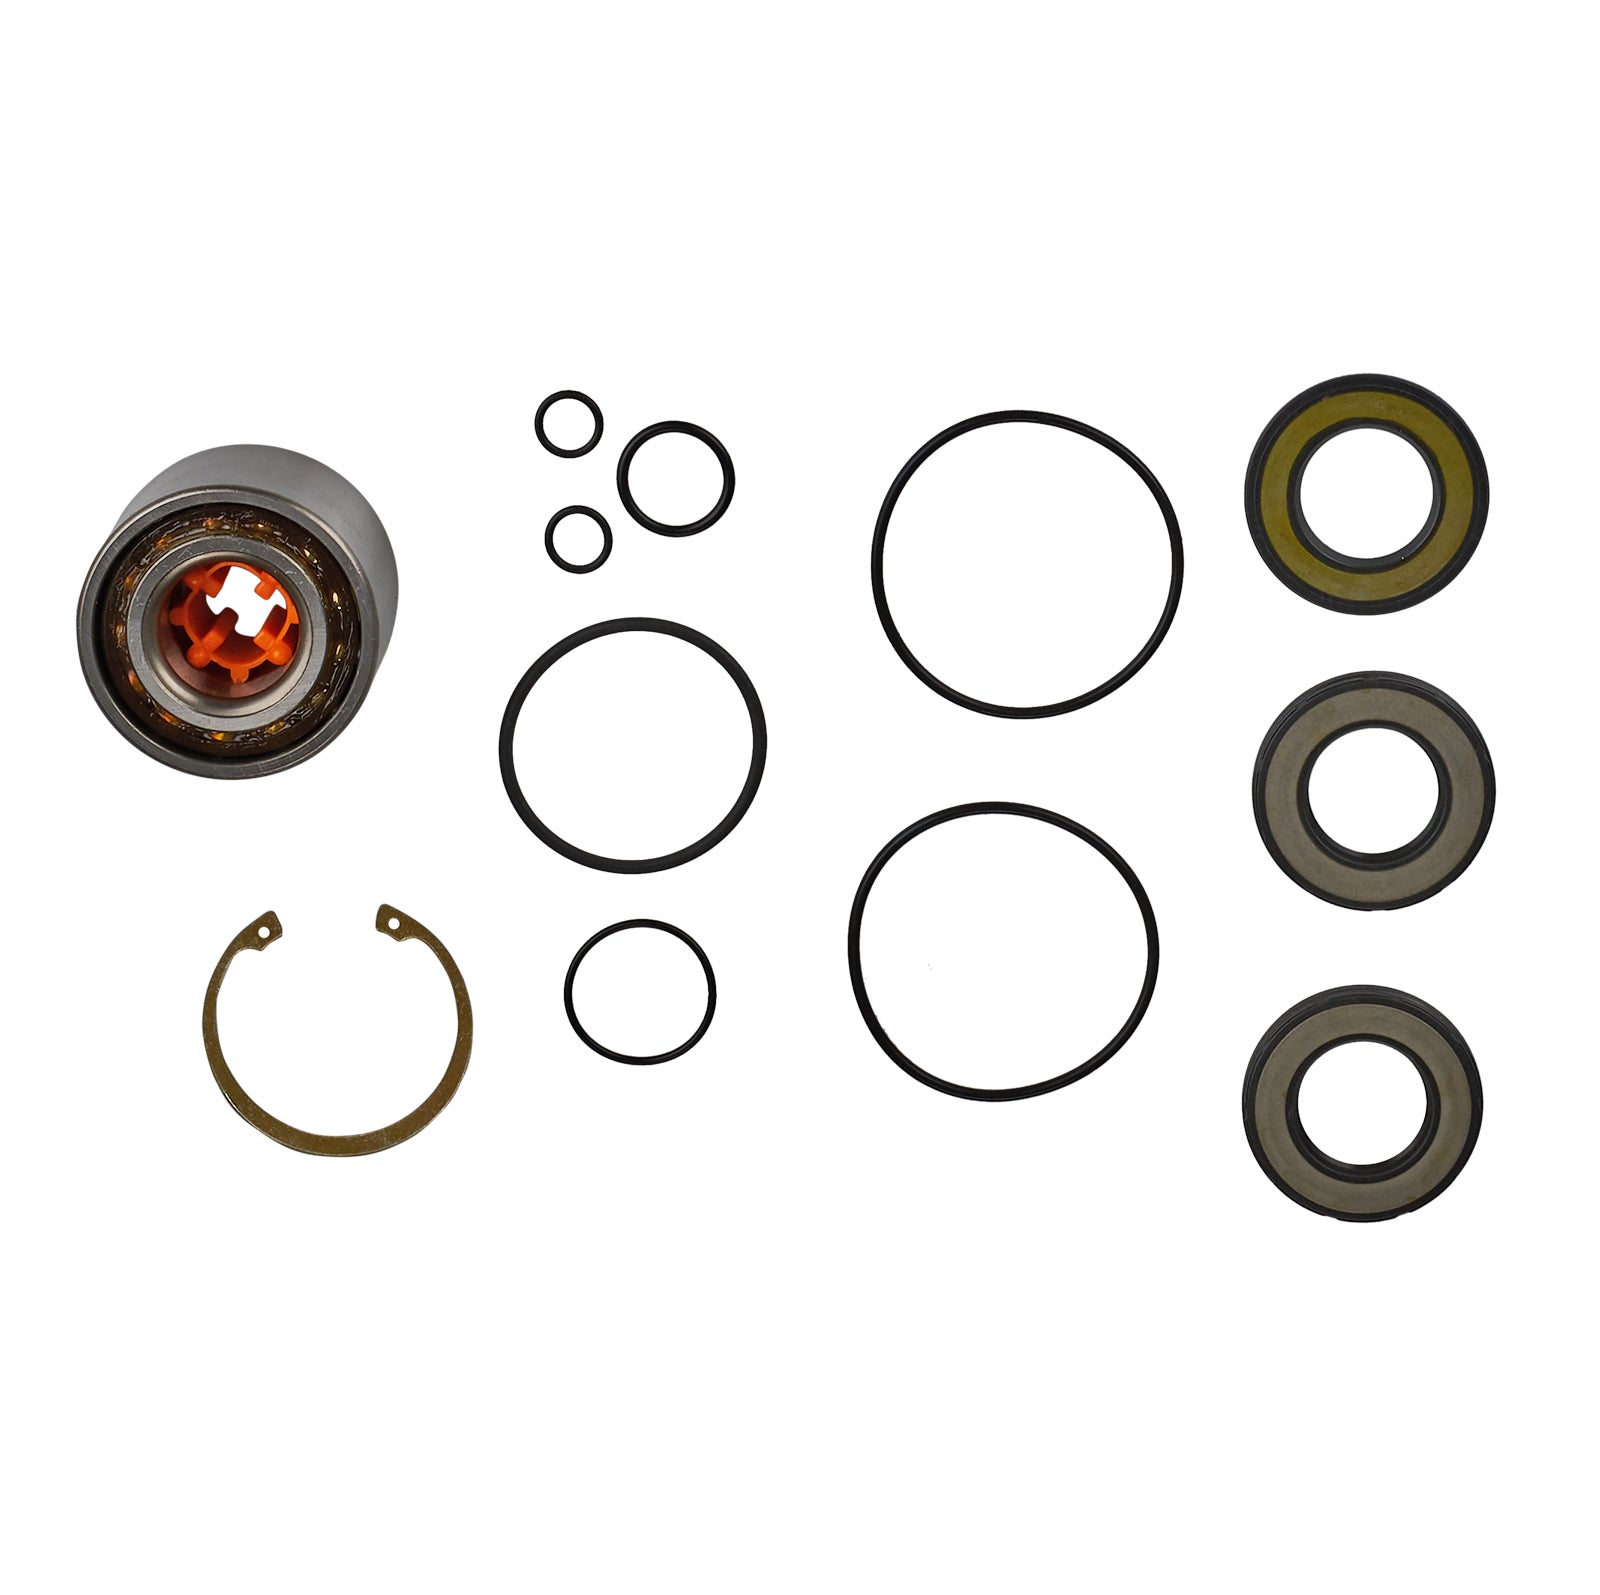 Jet Pump Rebuild Kit for Sea-Doo 2003 GTX 4-TEC/2004-2006 RXP/2004-2006 RXP SC/2004-2006 Speedster 200-see apps for more years